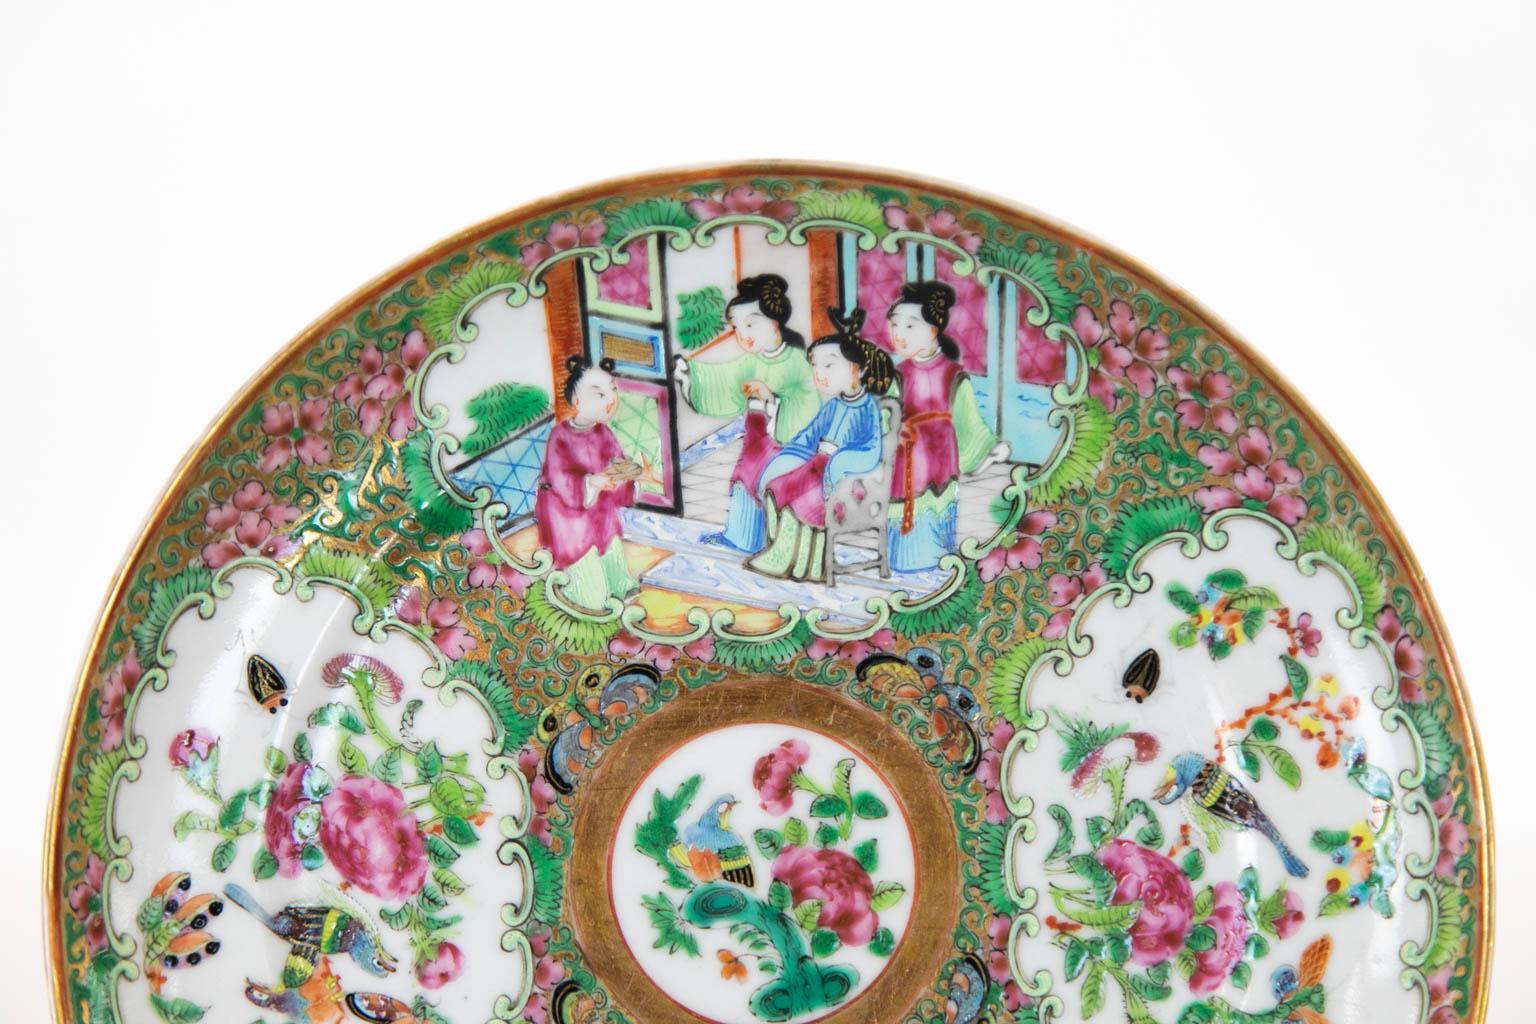 This plate has four cartouches depicting Mandarin court scenes, birds, flowers, fruit, and butterflies. It is in mint condition.